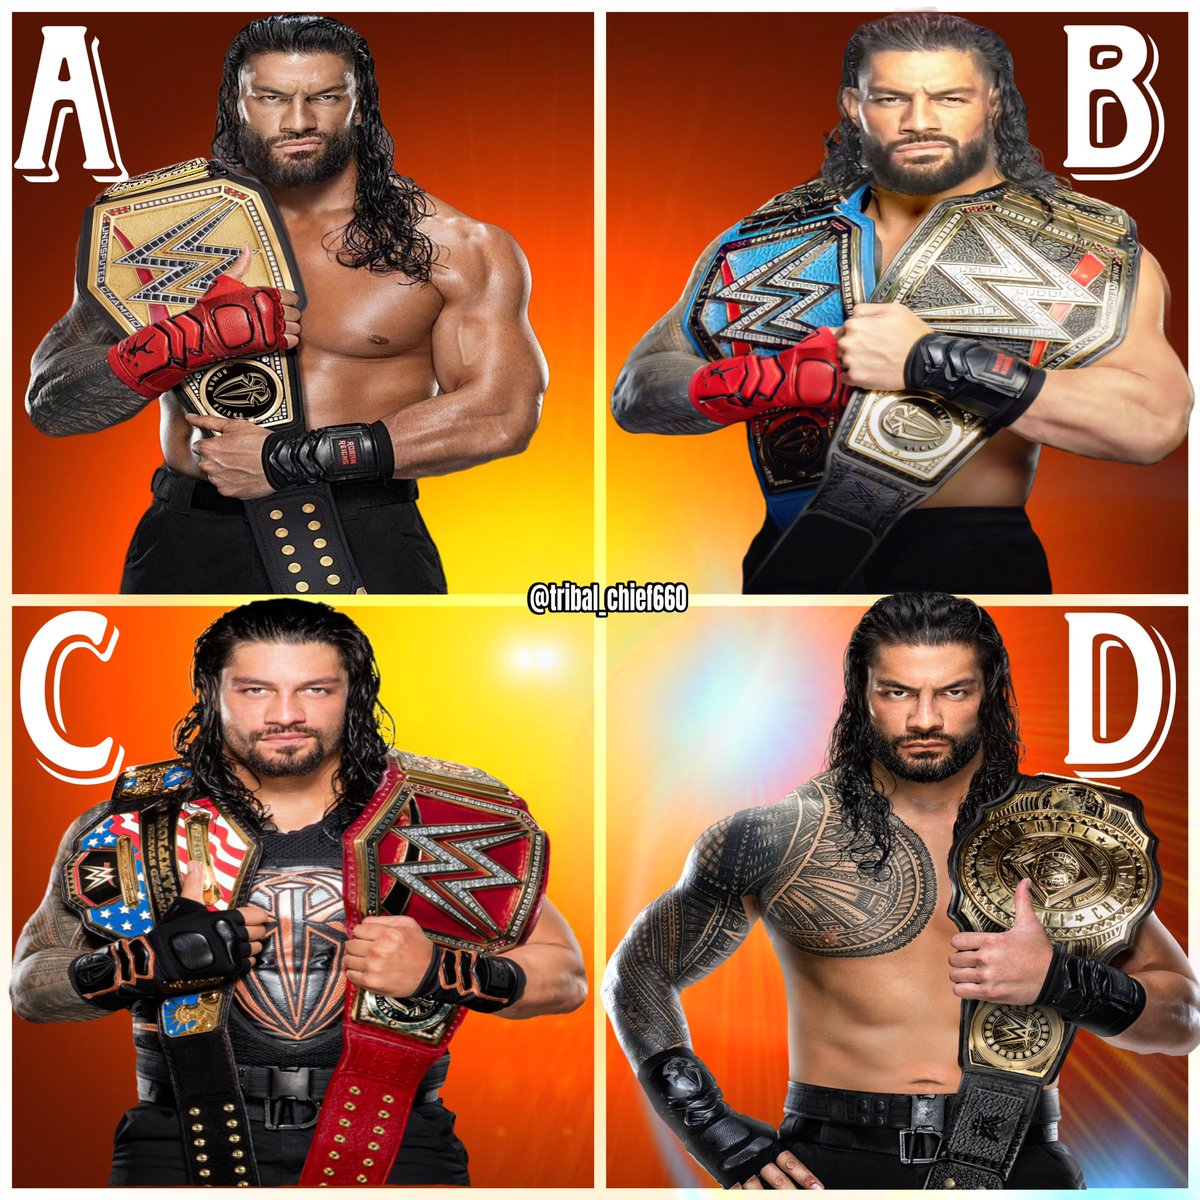 Which is better?
A,B,C,D! 
#RomanReigns #TribalChief #Theheadofthetable